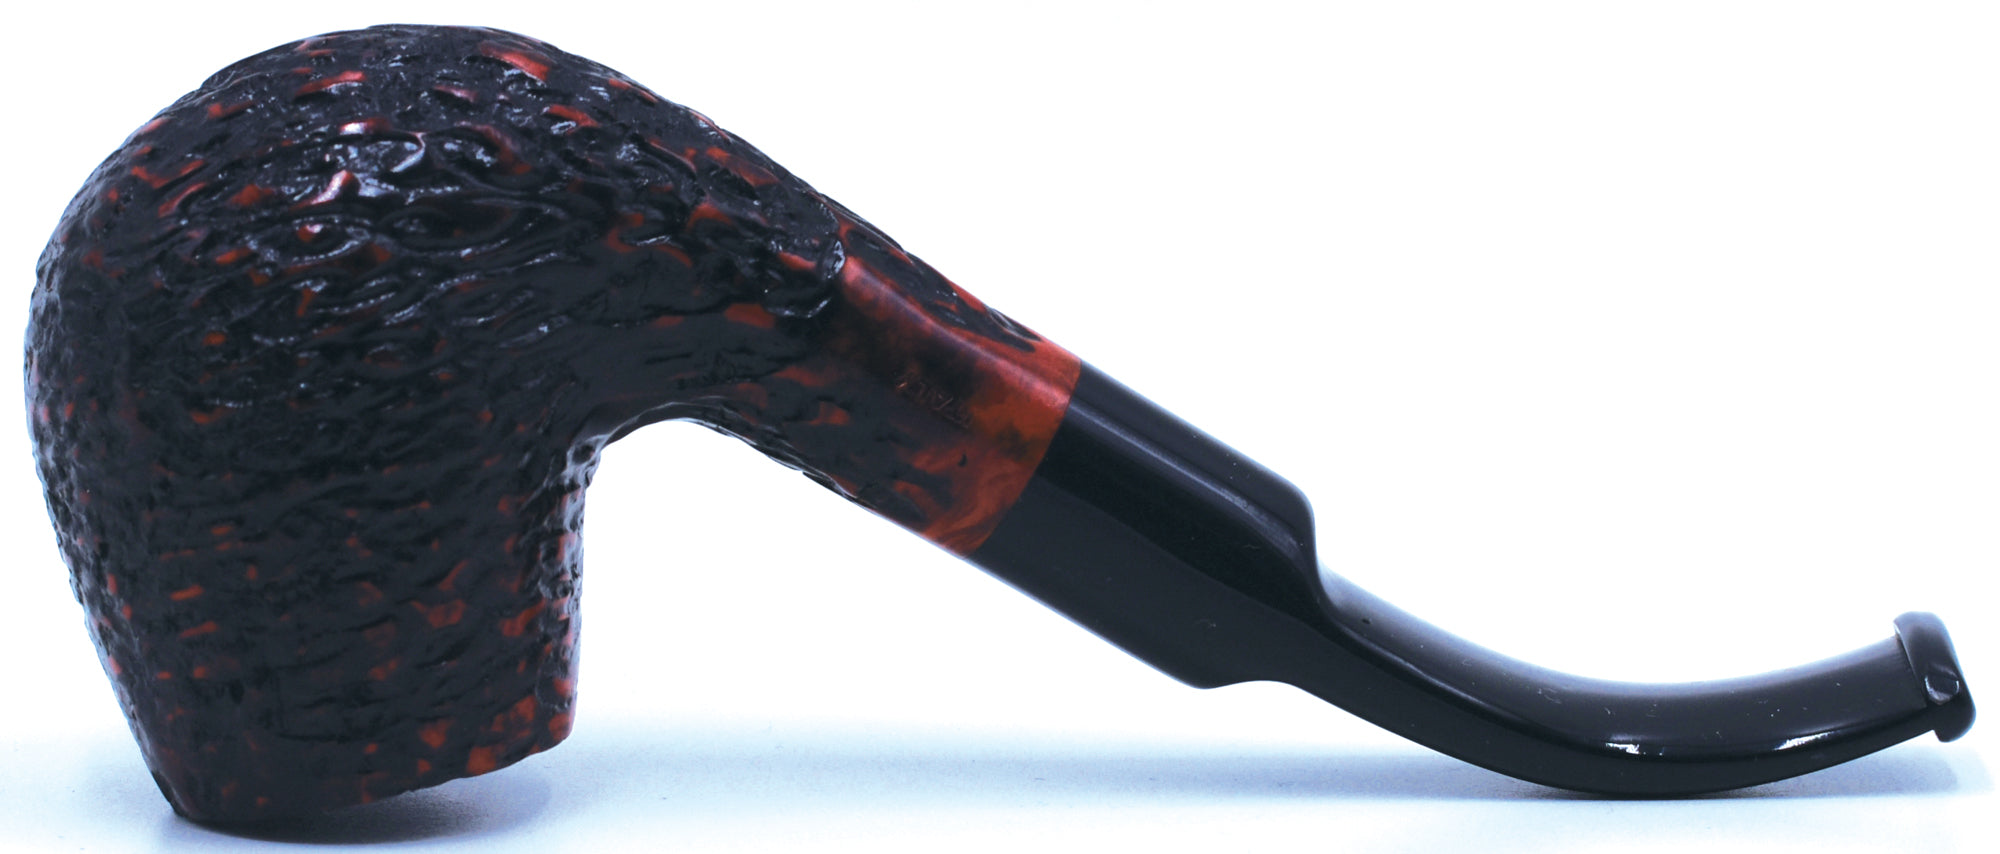 LEGENDEX® PAGANINI* 9 MM Filtered Briar Smoking Pipe Made In Italy 01-08-336